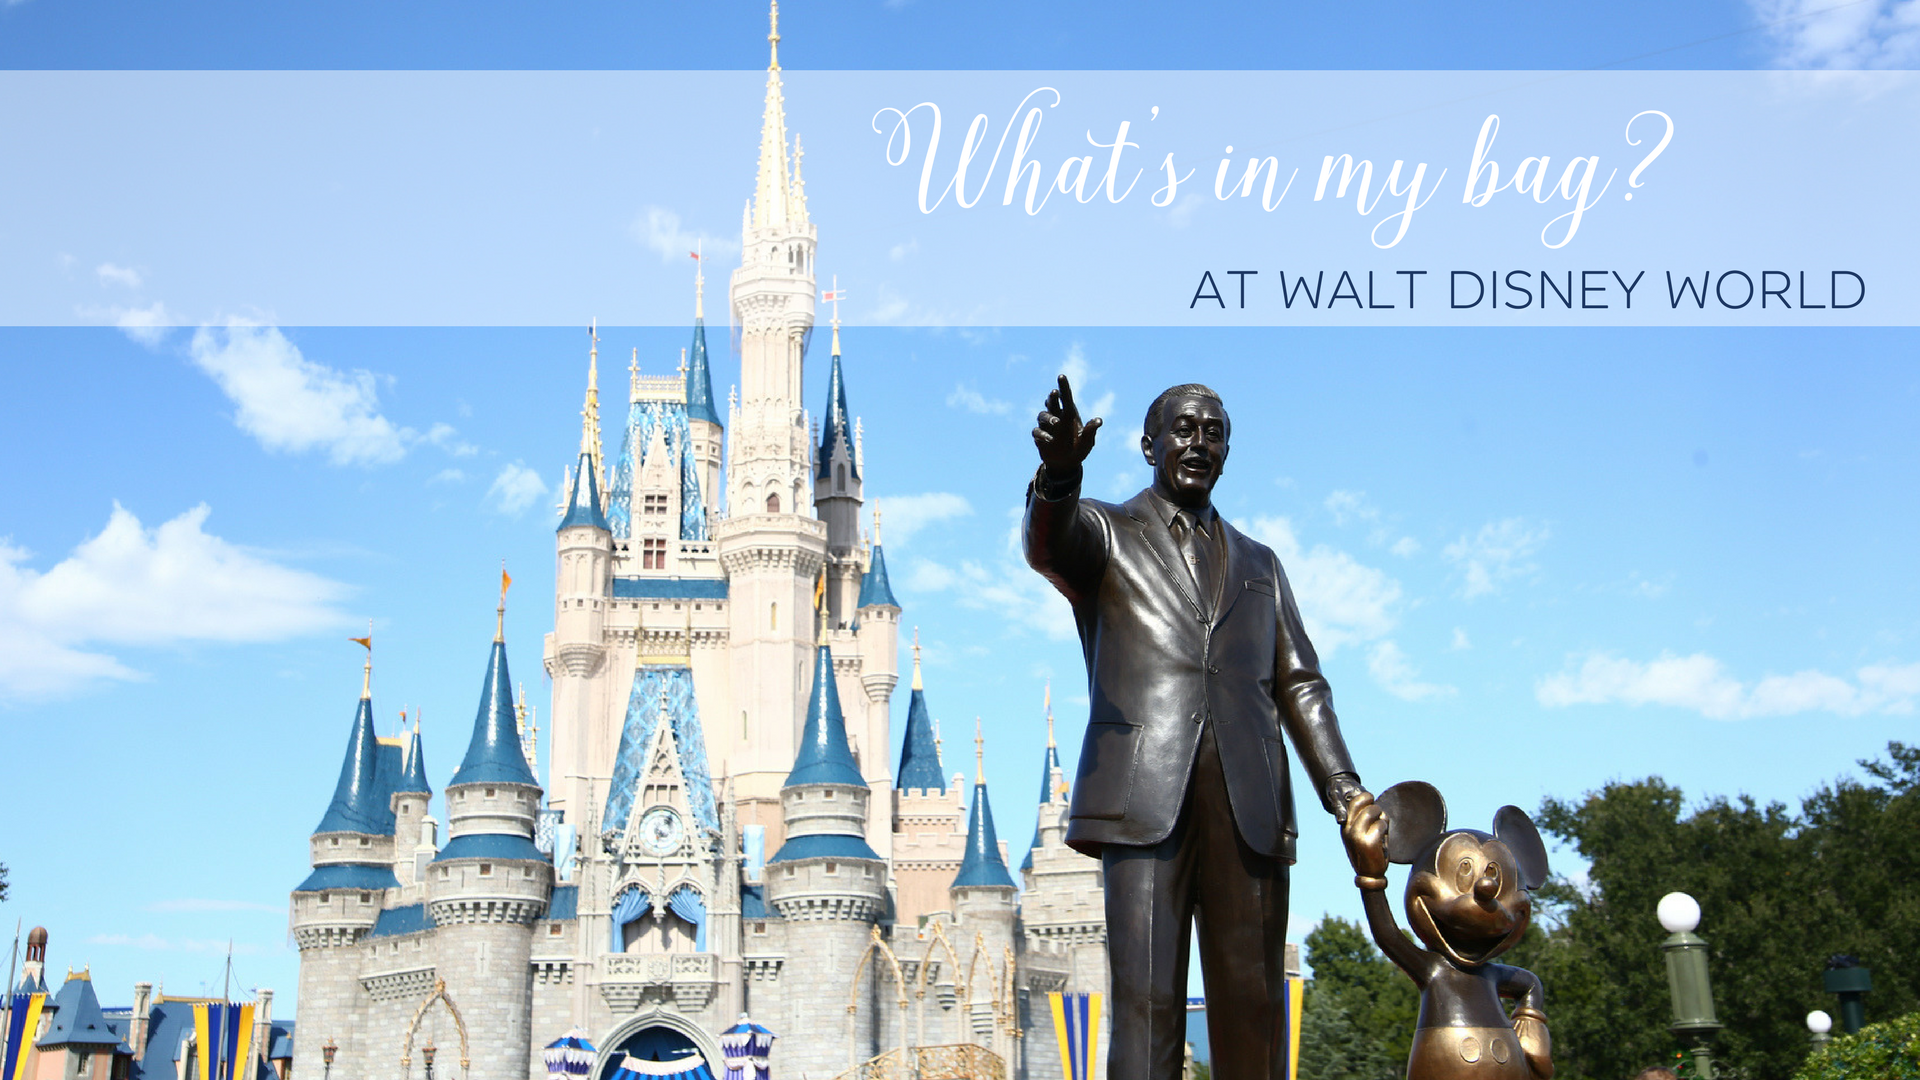 What's in my bag? At Walt Disney World